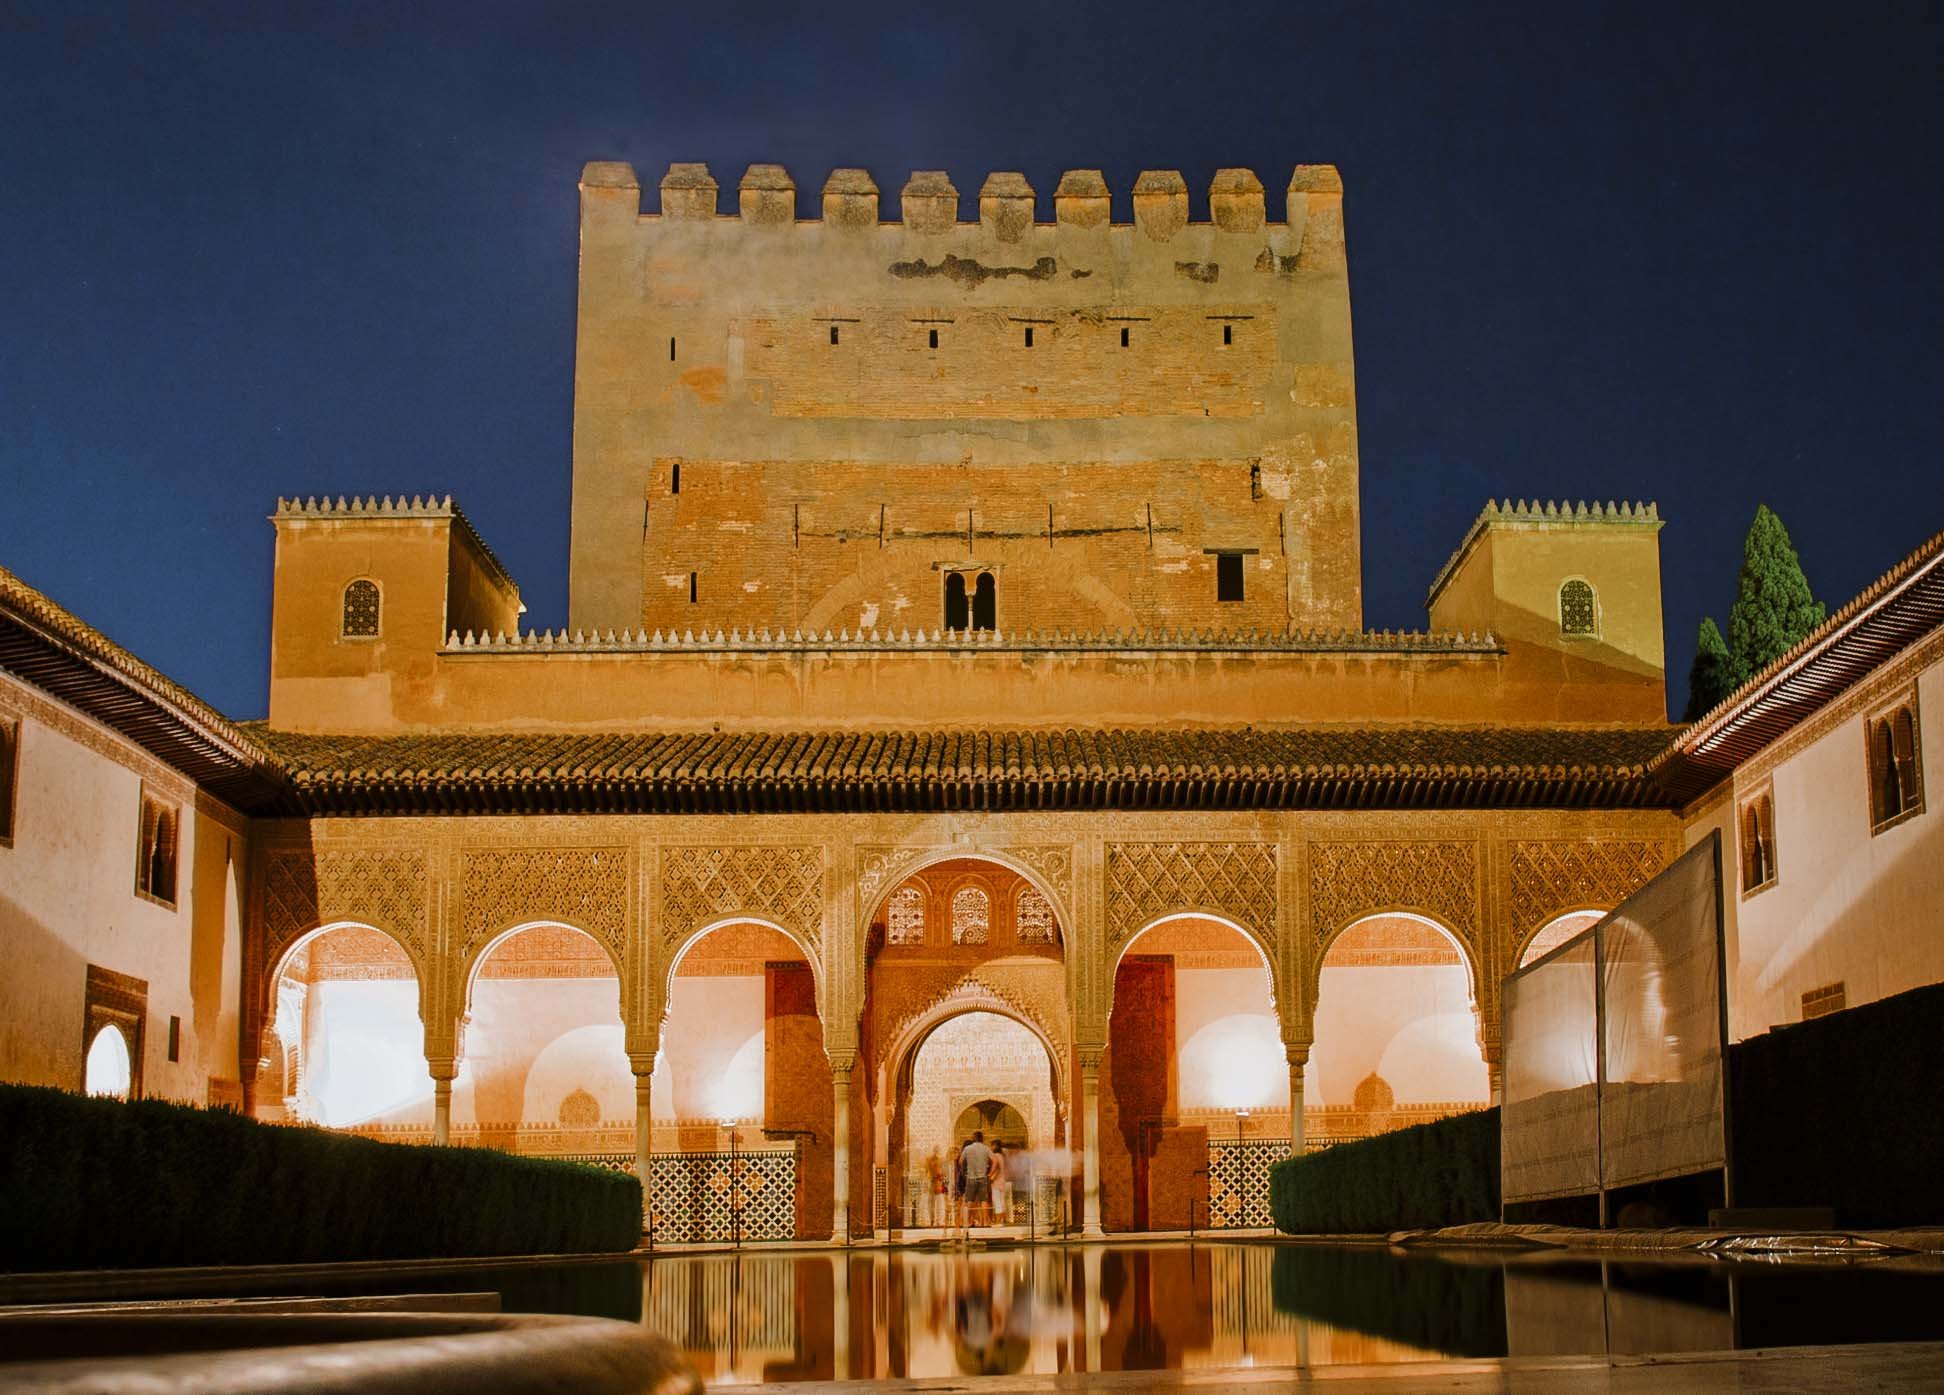 The Nasrid palaces in the Alhambra at night